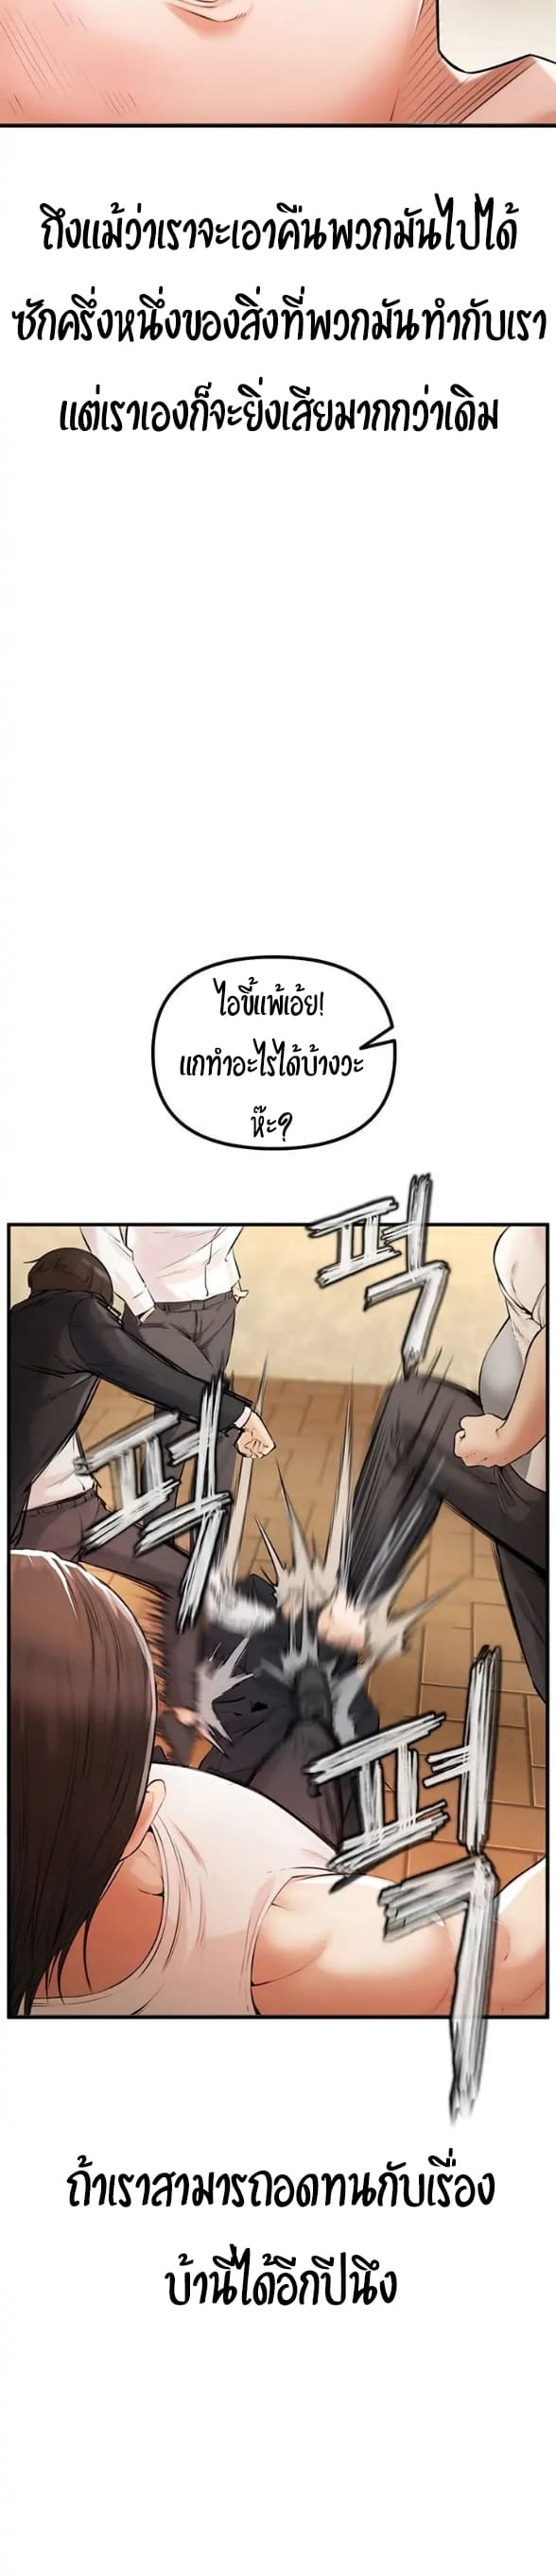 The Real Deal ตอนที่ 1 ภาพ 14